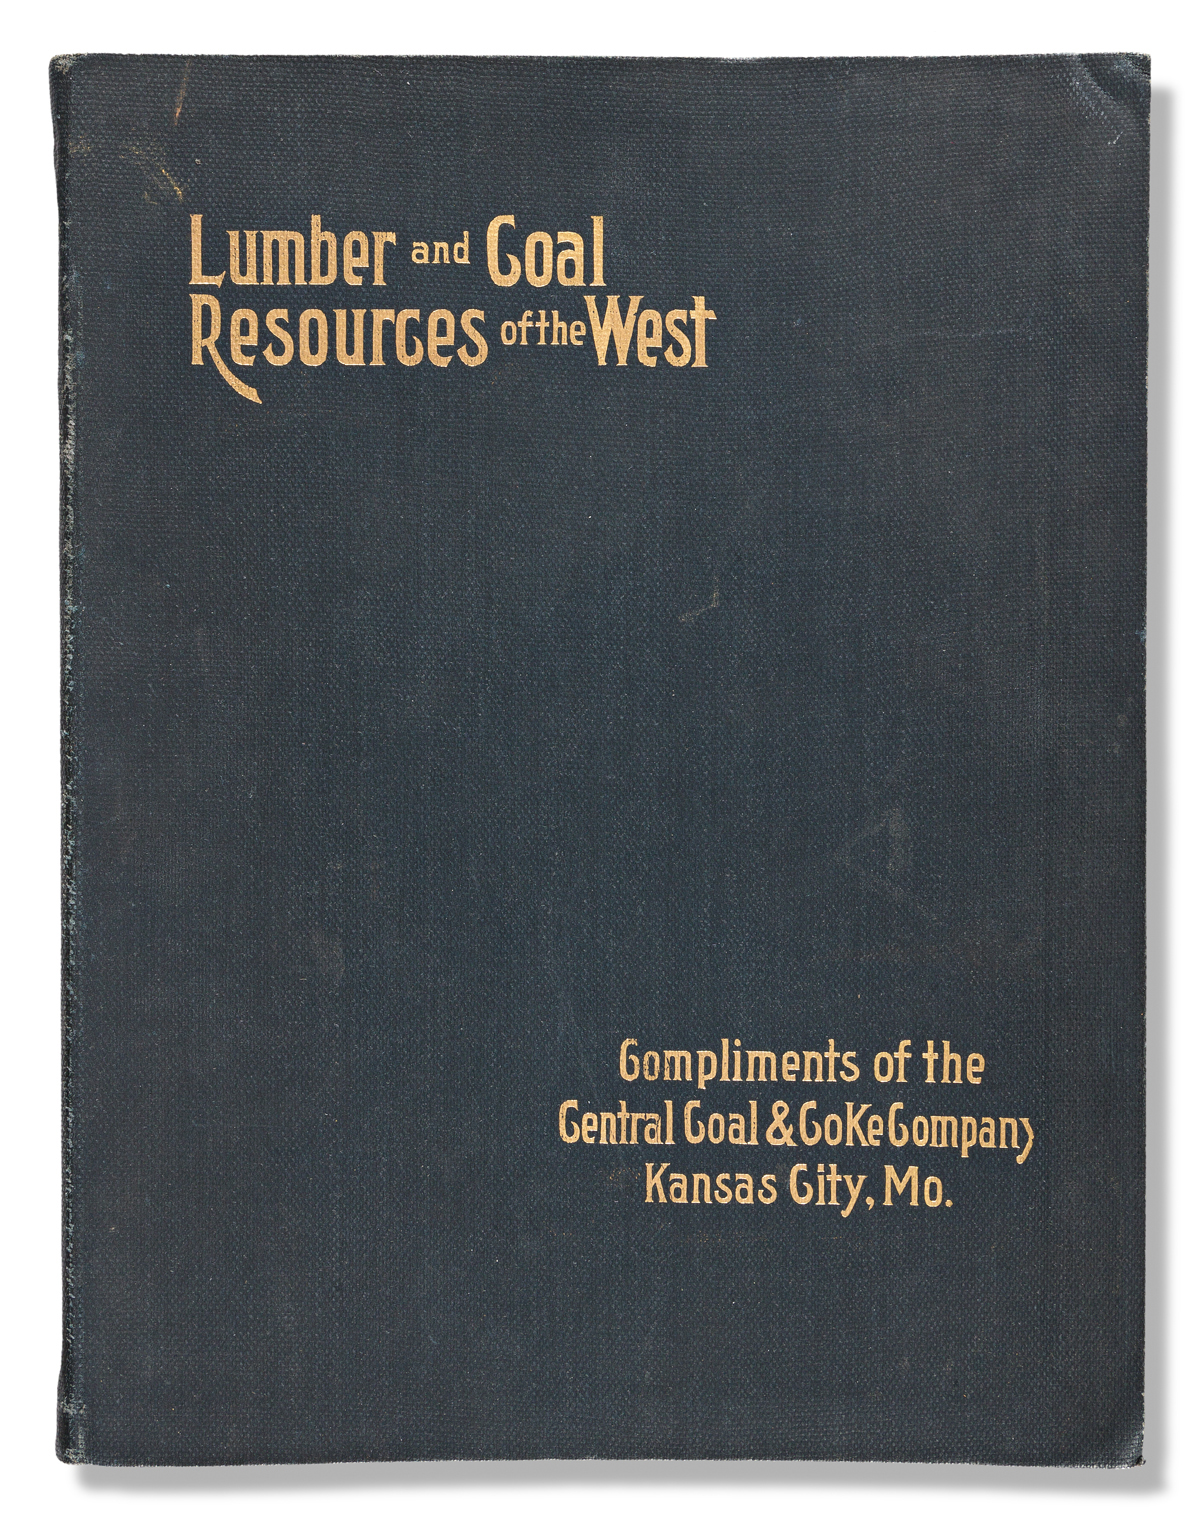 (BUSINESS.) Western Coal and Lumber Resources . . . of the Central Coal & Coke Company of Kansas City.